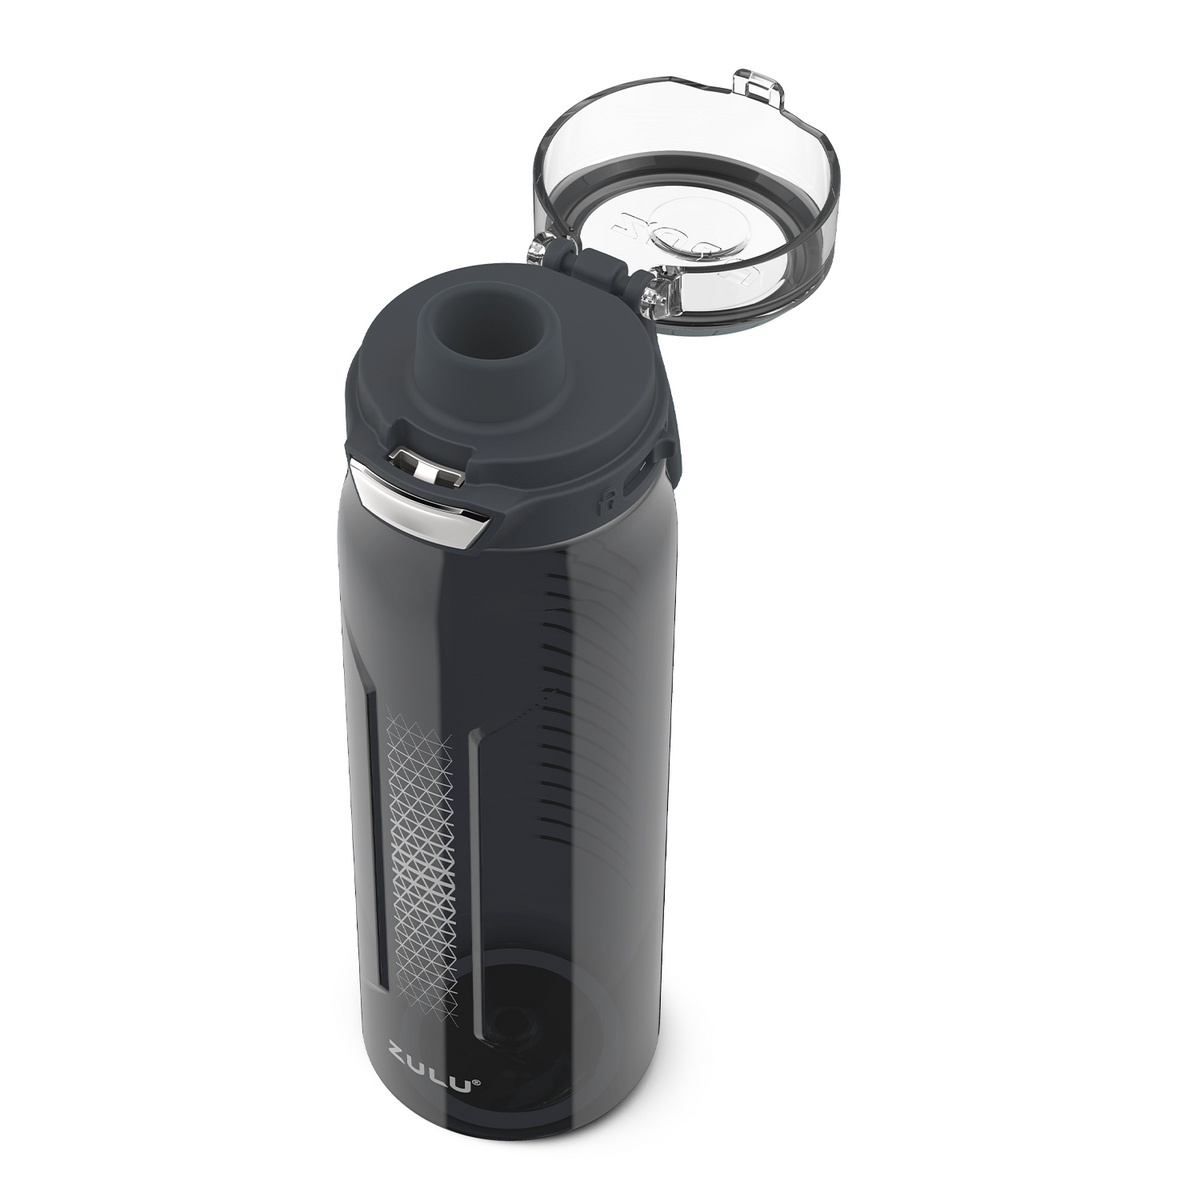  ZULU Swift Stainless Steel Vacuum Insulated Water Bottle with  Covered Silicone Straw, 32oz (Black) : Home & Kitchen